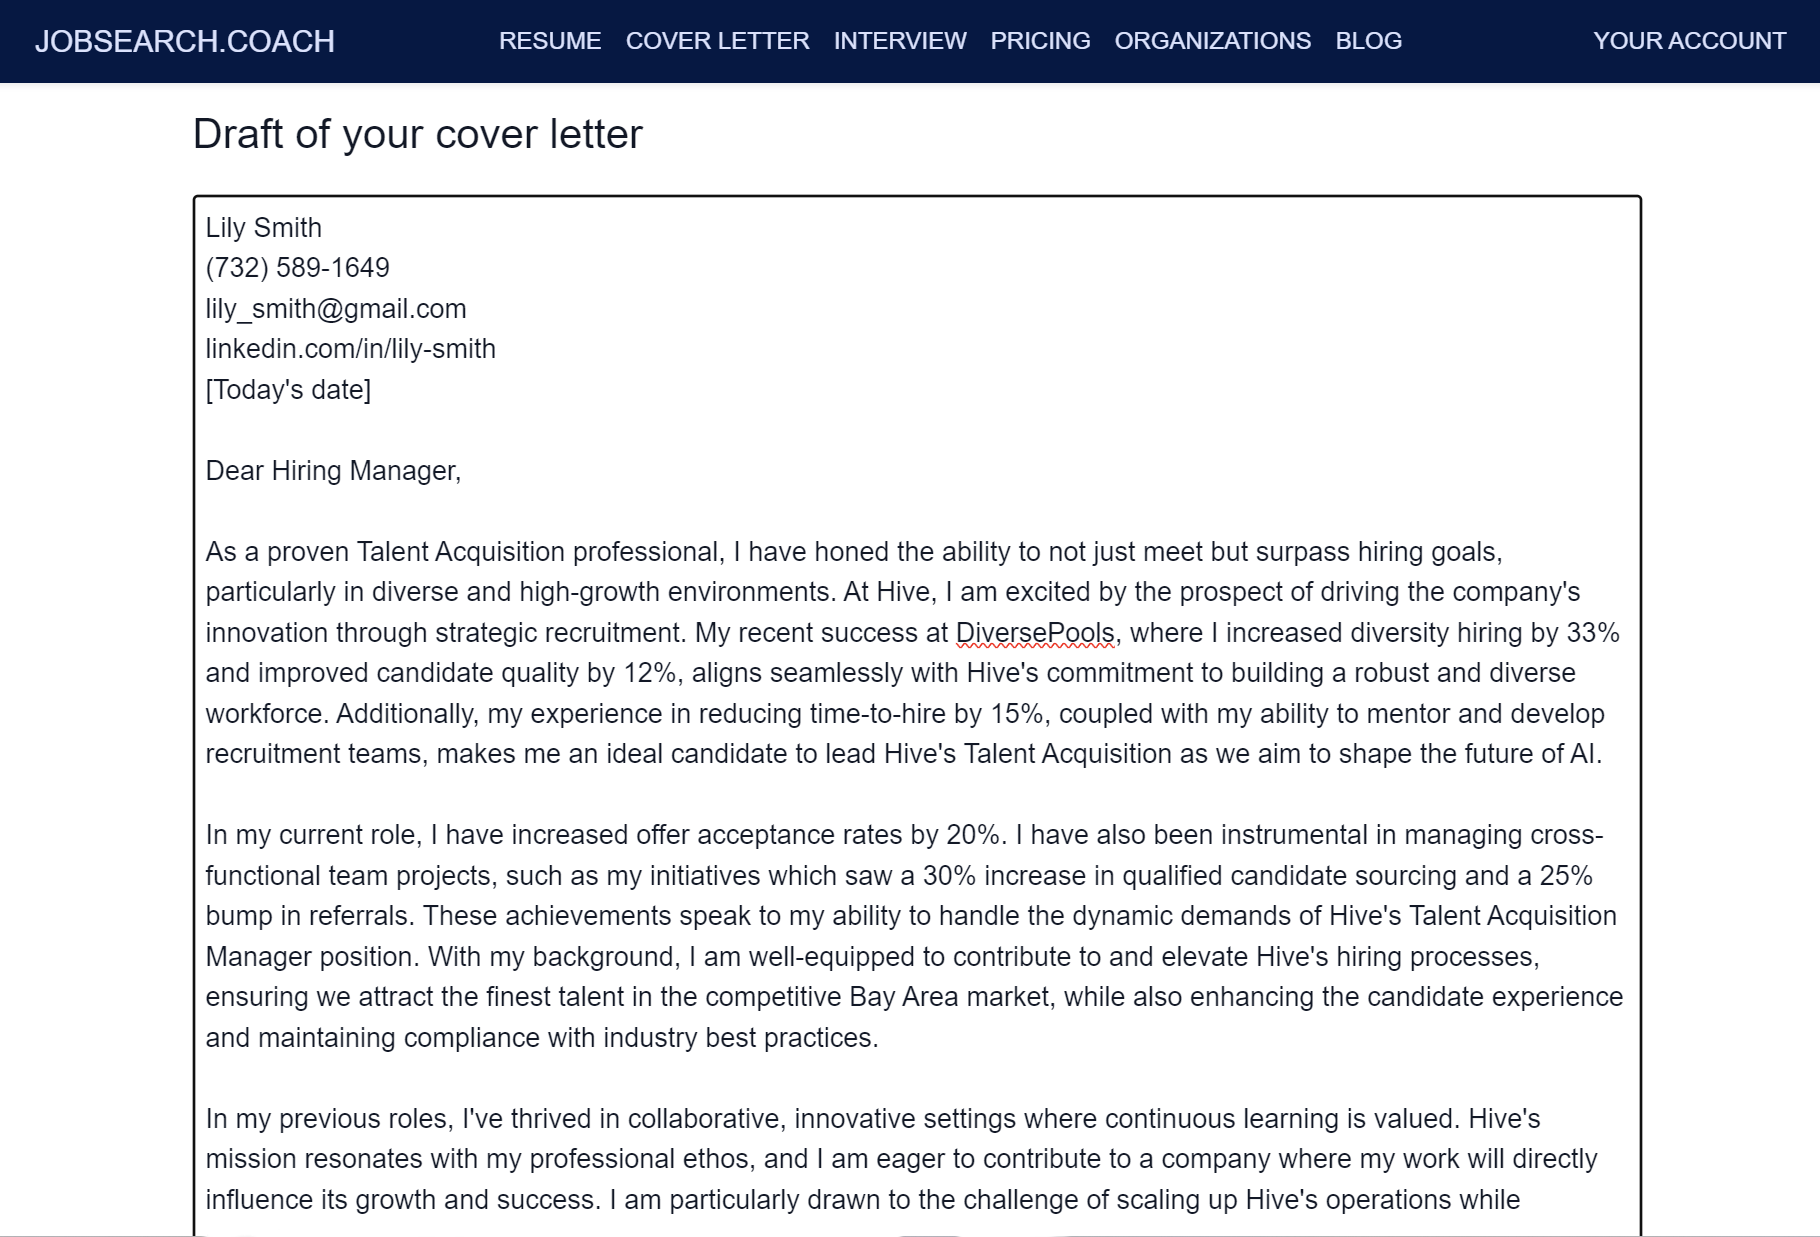 JobSearch.Coach AI-generated cover letter